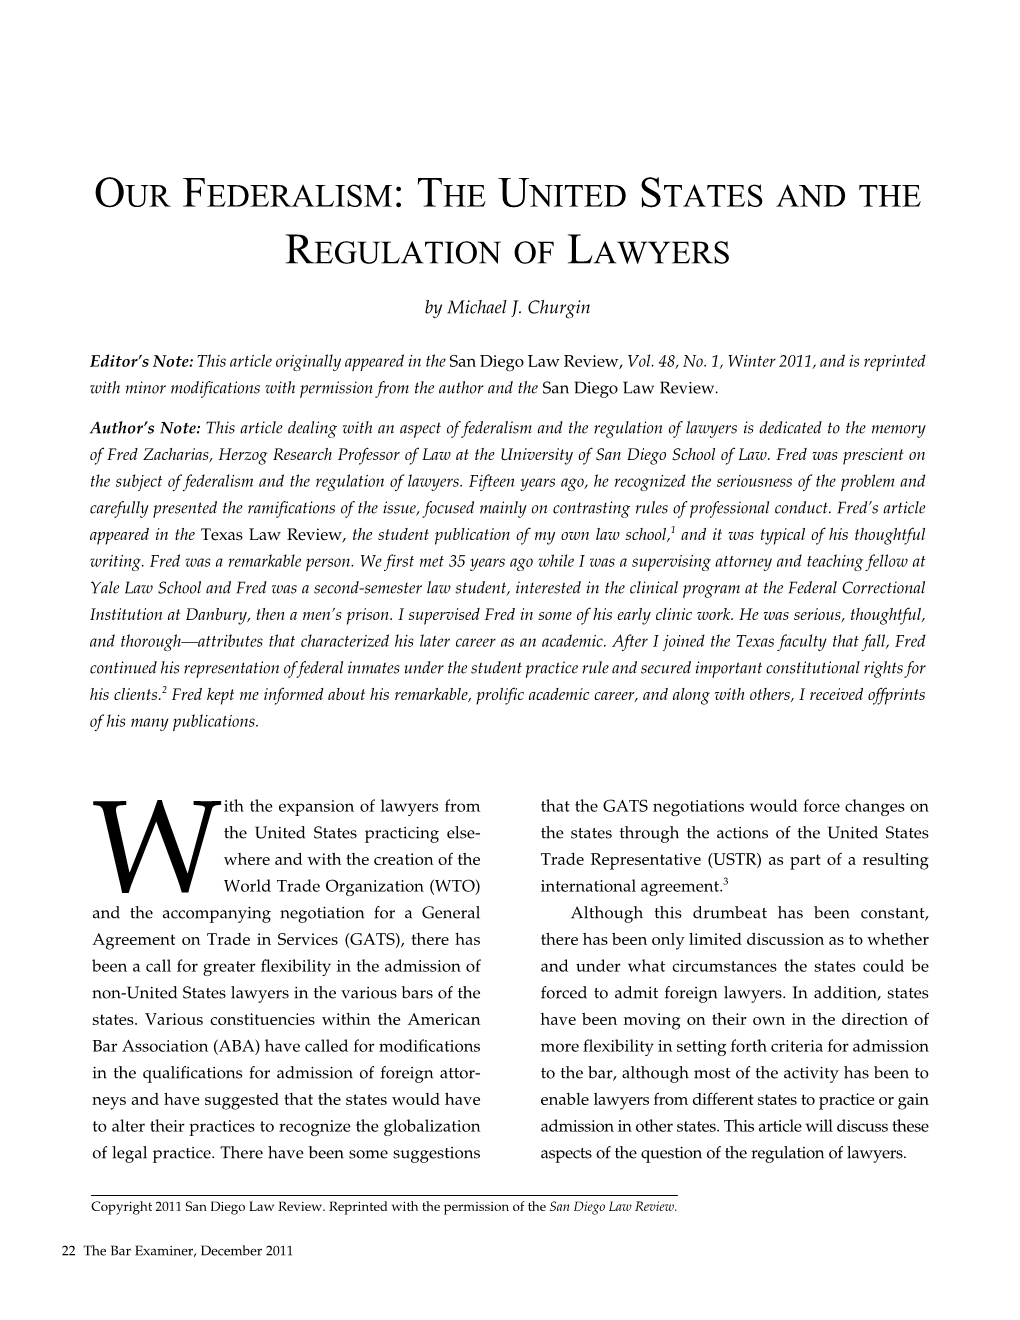 Our Federalism: the United States and the Regulation of Lawyers